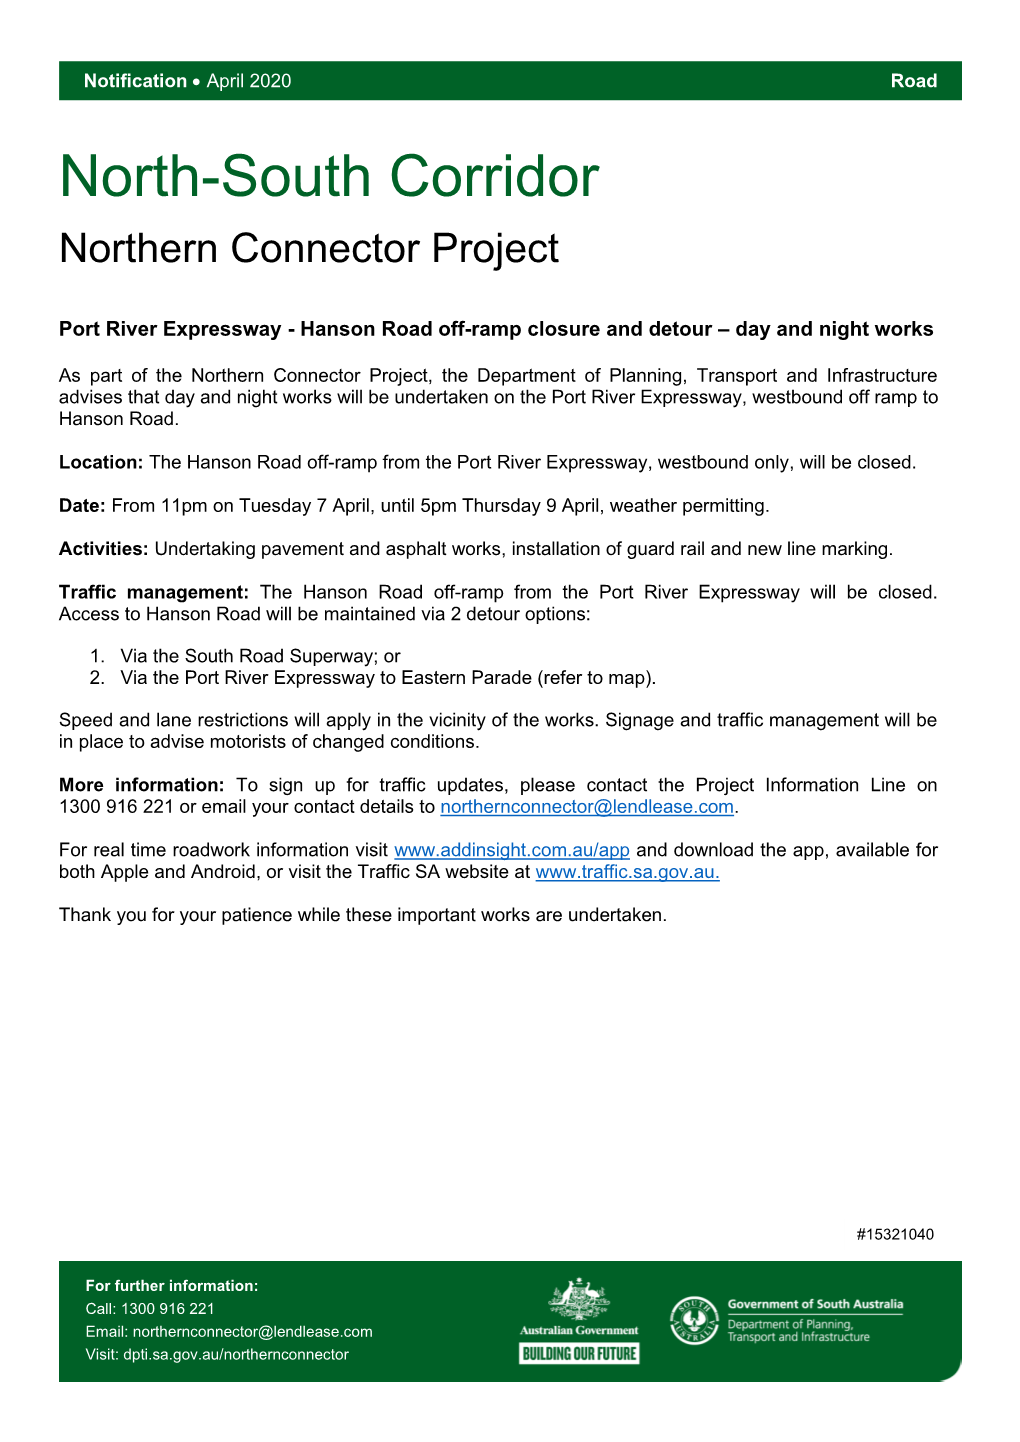 Port River Expressway - Hanson Road Off-Ramp Closure and Detour – Day and Night Works